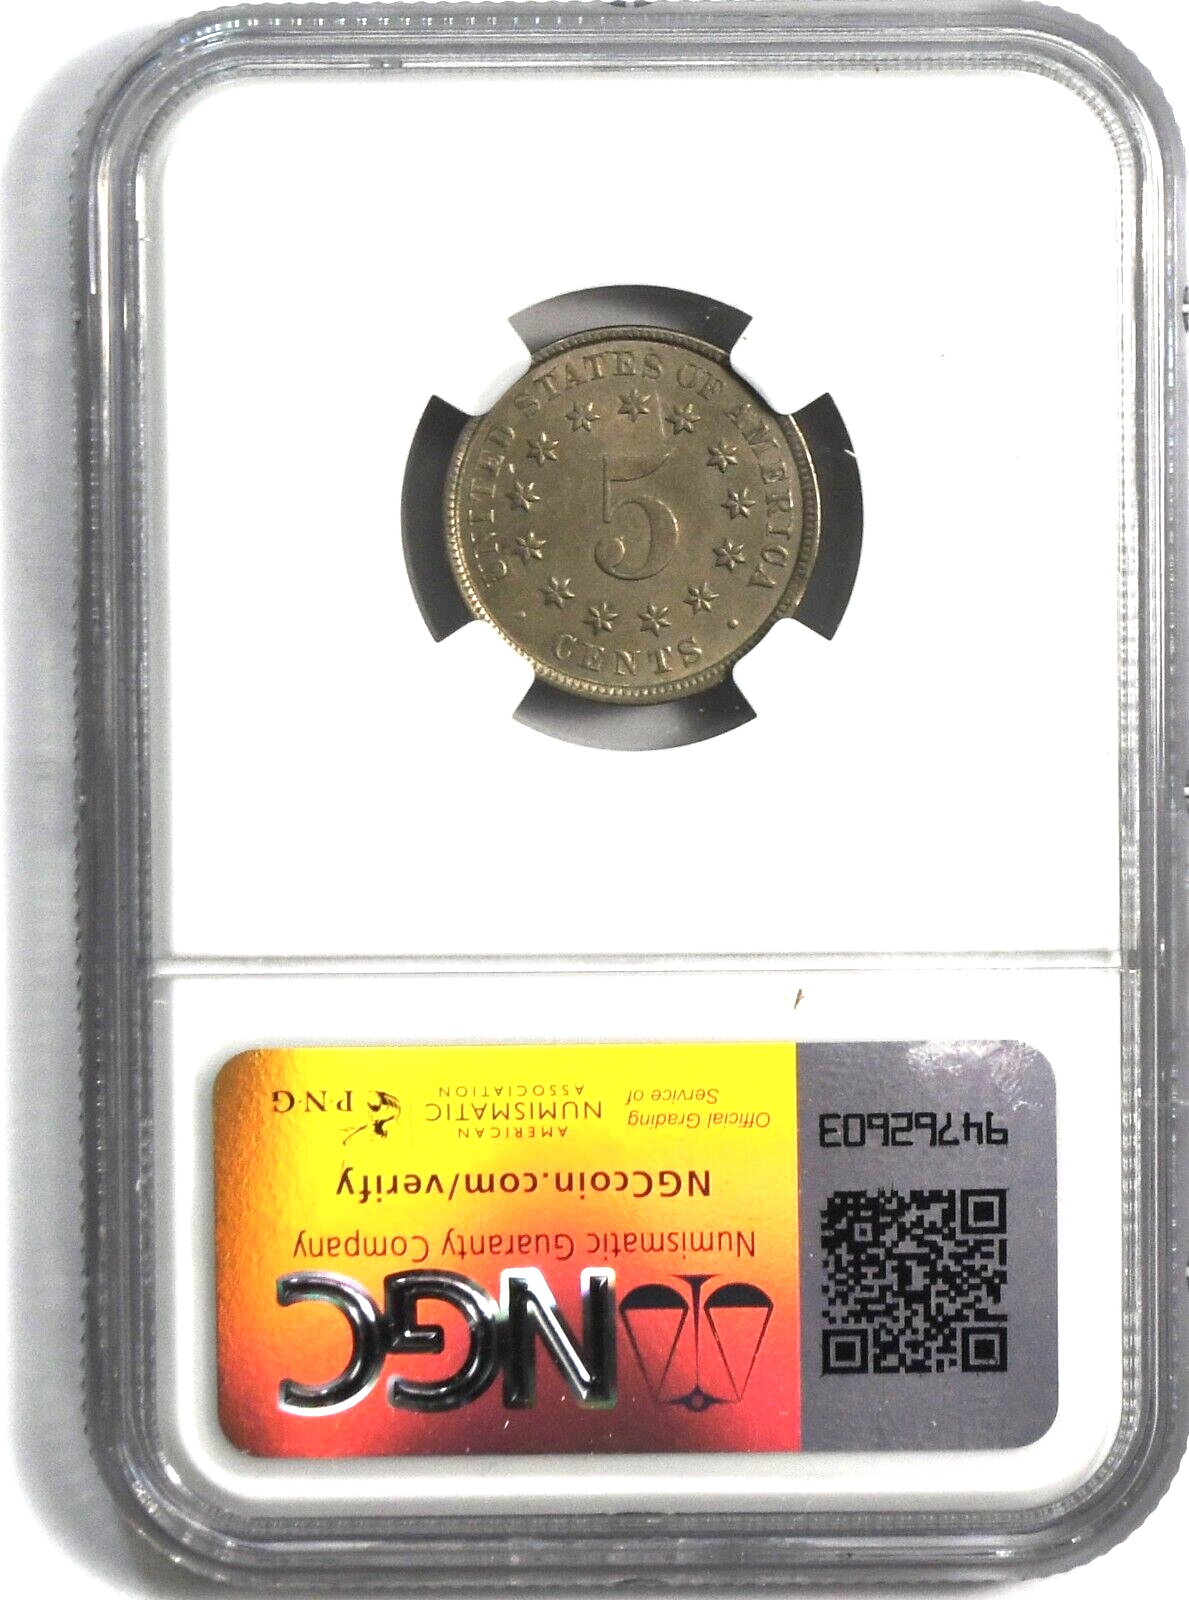 1883 5c Shield Nickel Five Cents US Coin MS62 Uncirculated NGC